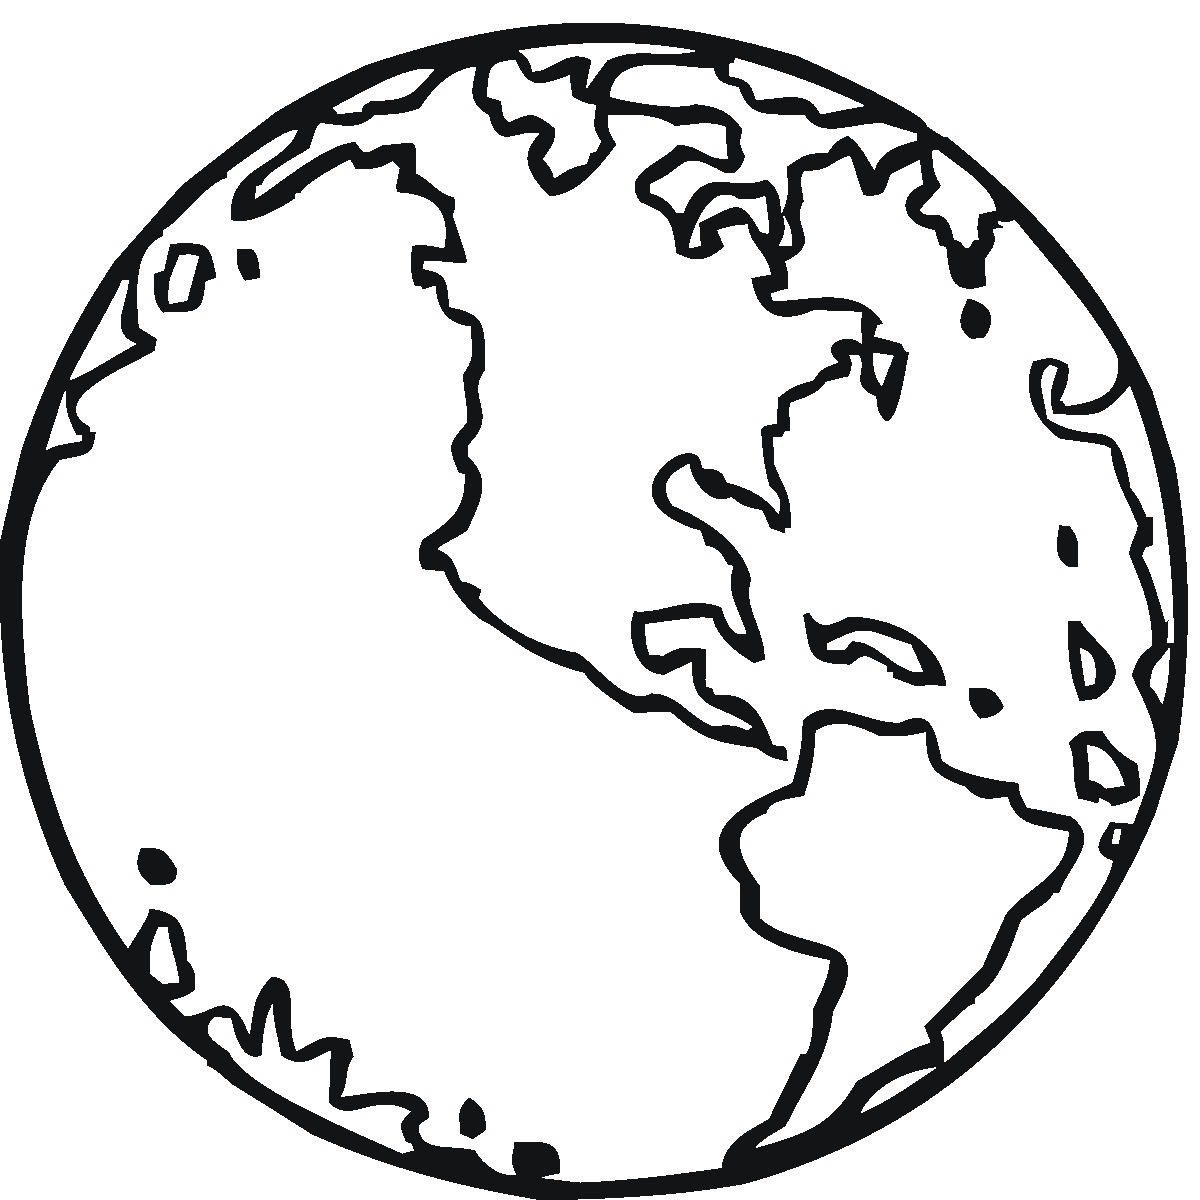 Free Printable Earth Coloring Pages For Kids - SheetalColor.com